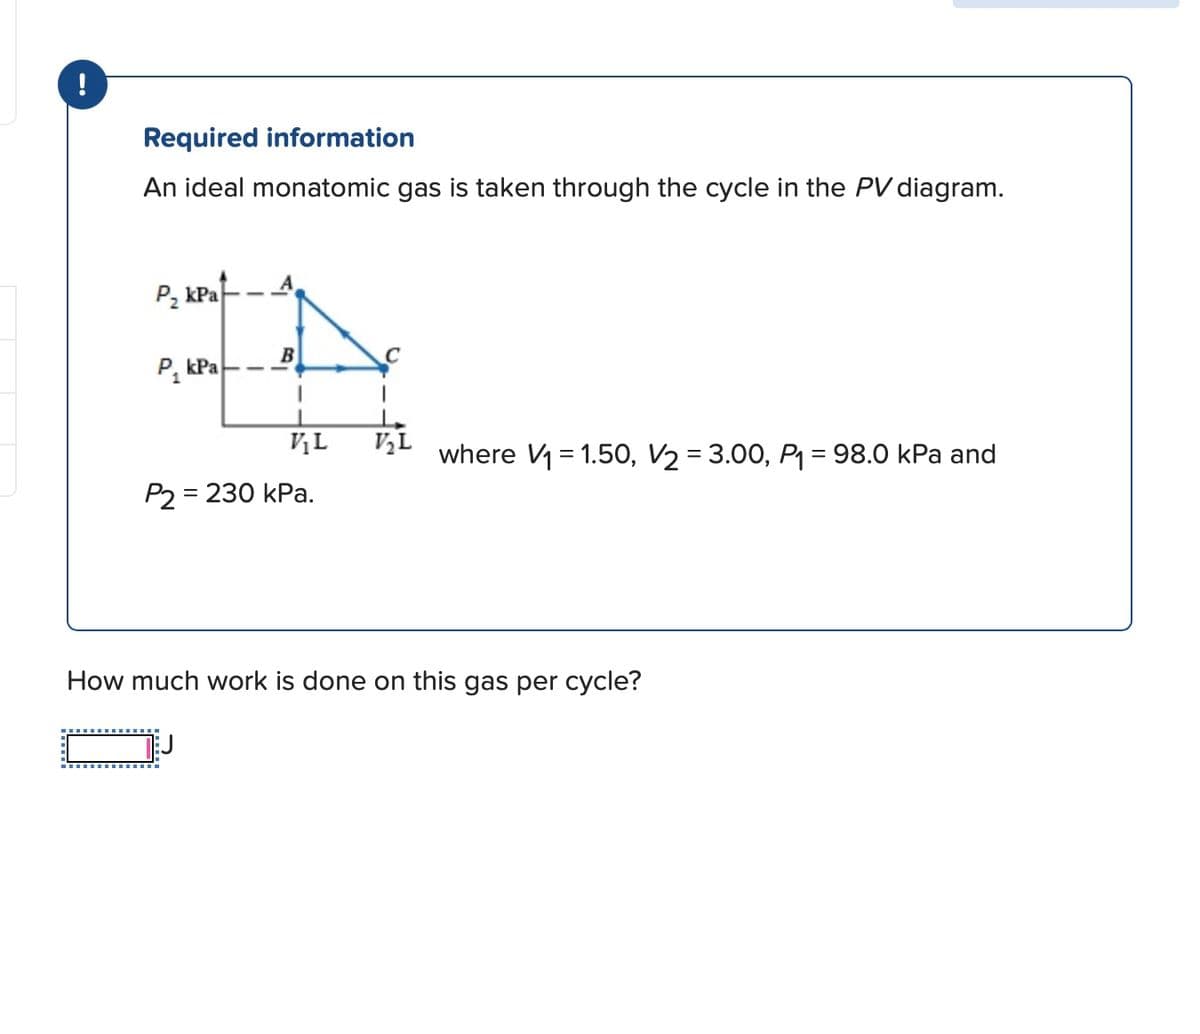 !
Required information
An ideal monatomic gas is taken through the cycle in the PV diagram.
P₂ kPa
P₁ kPa
B
V₁L V₂L
where V₁ = 1.50, V₂ = 3.00, P₁ = 98.0 kPa and
P2 = 230 kPa.
How much work is done on this gas per cycle?